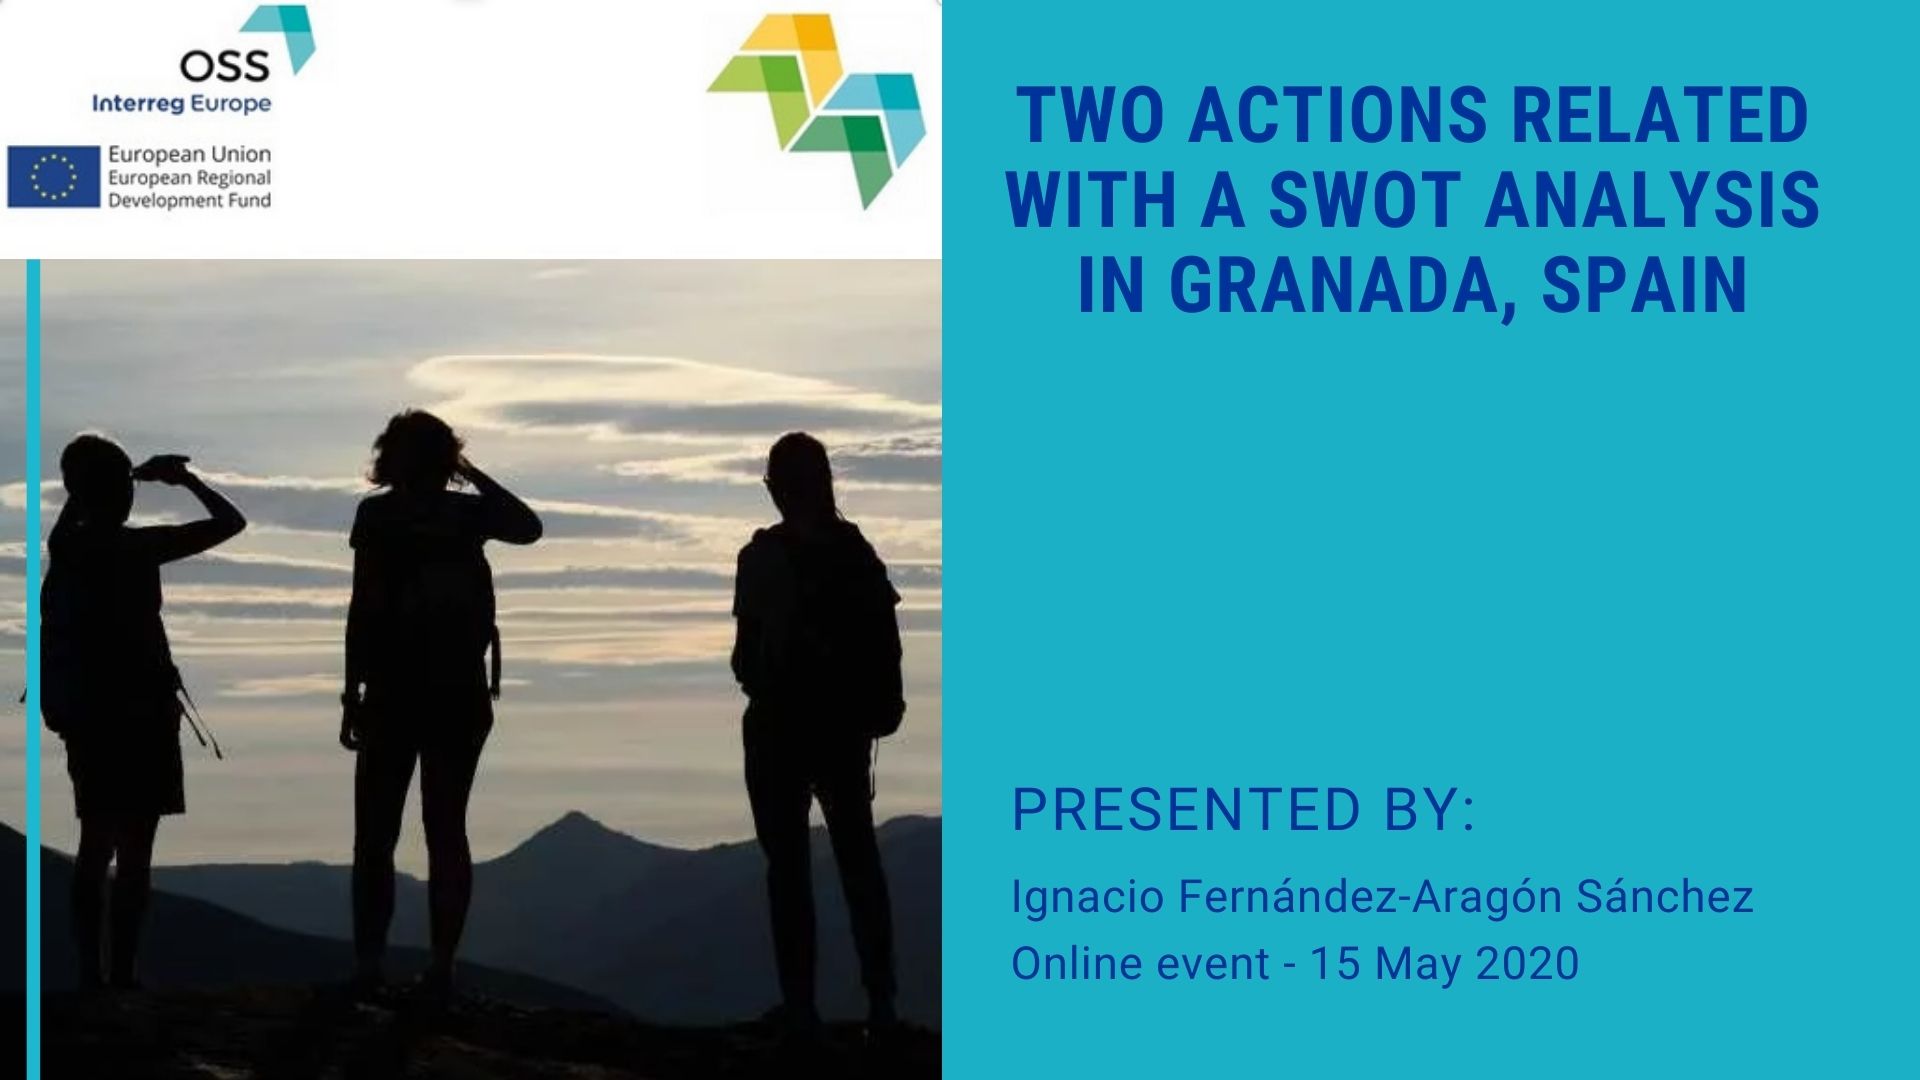 Two actions related to a SWOT analysis in Granada